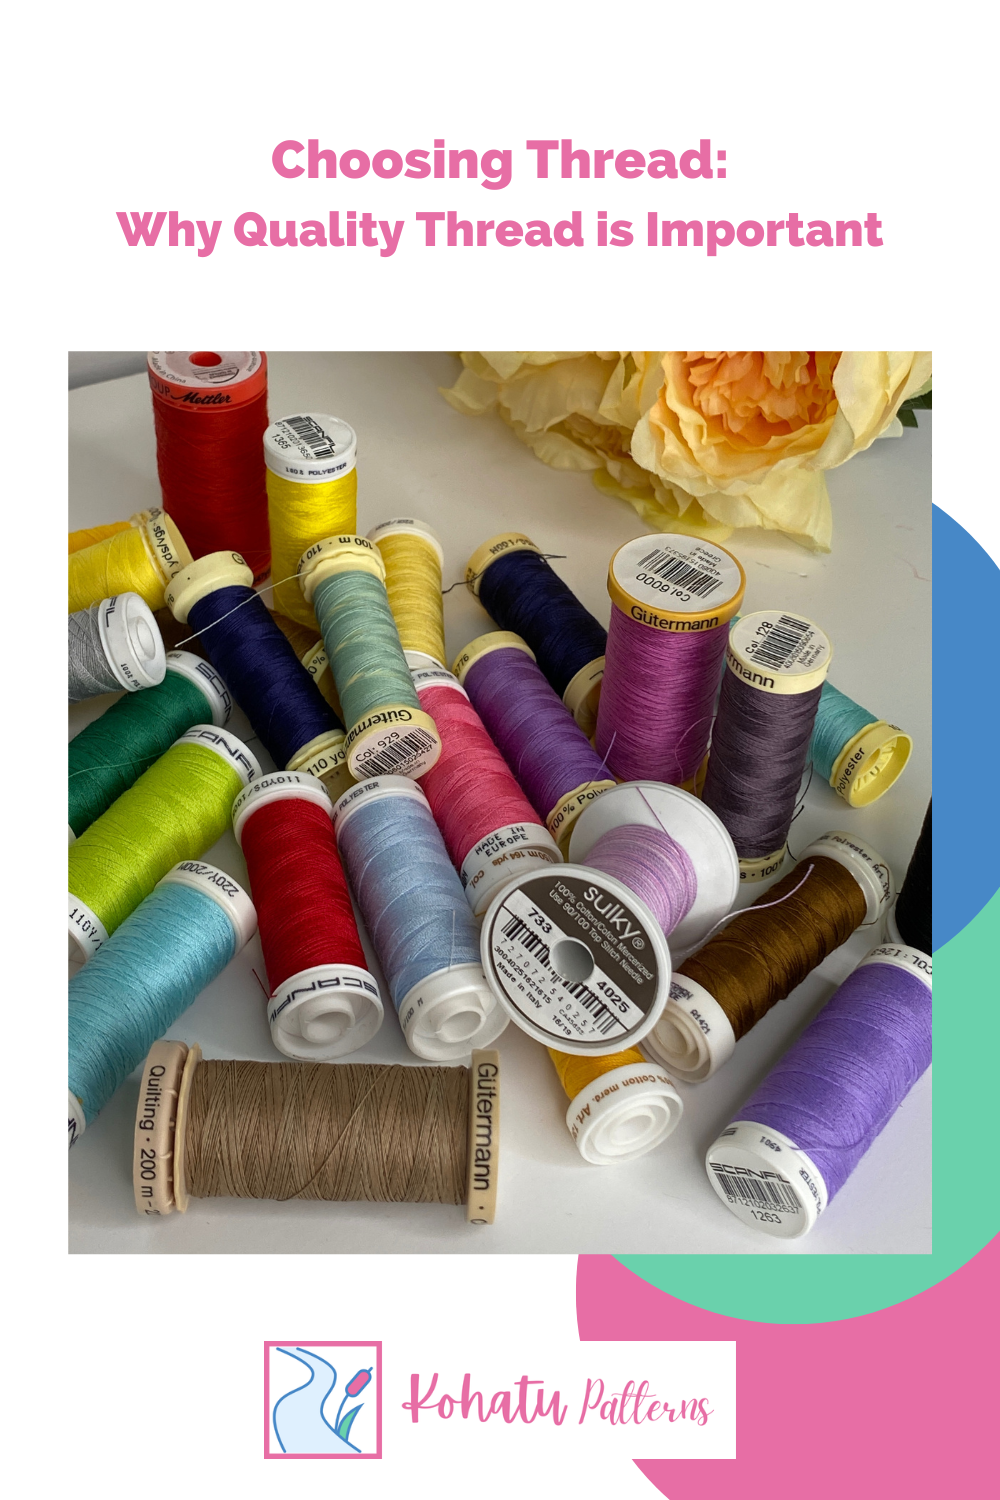 Choosing Thread: Why choosing a quality thread for your next quilting or sewing project is important. The image shows a collection of different quilting and sewing threads